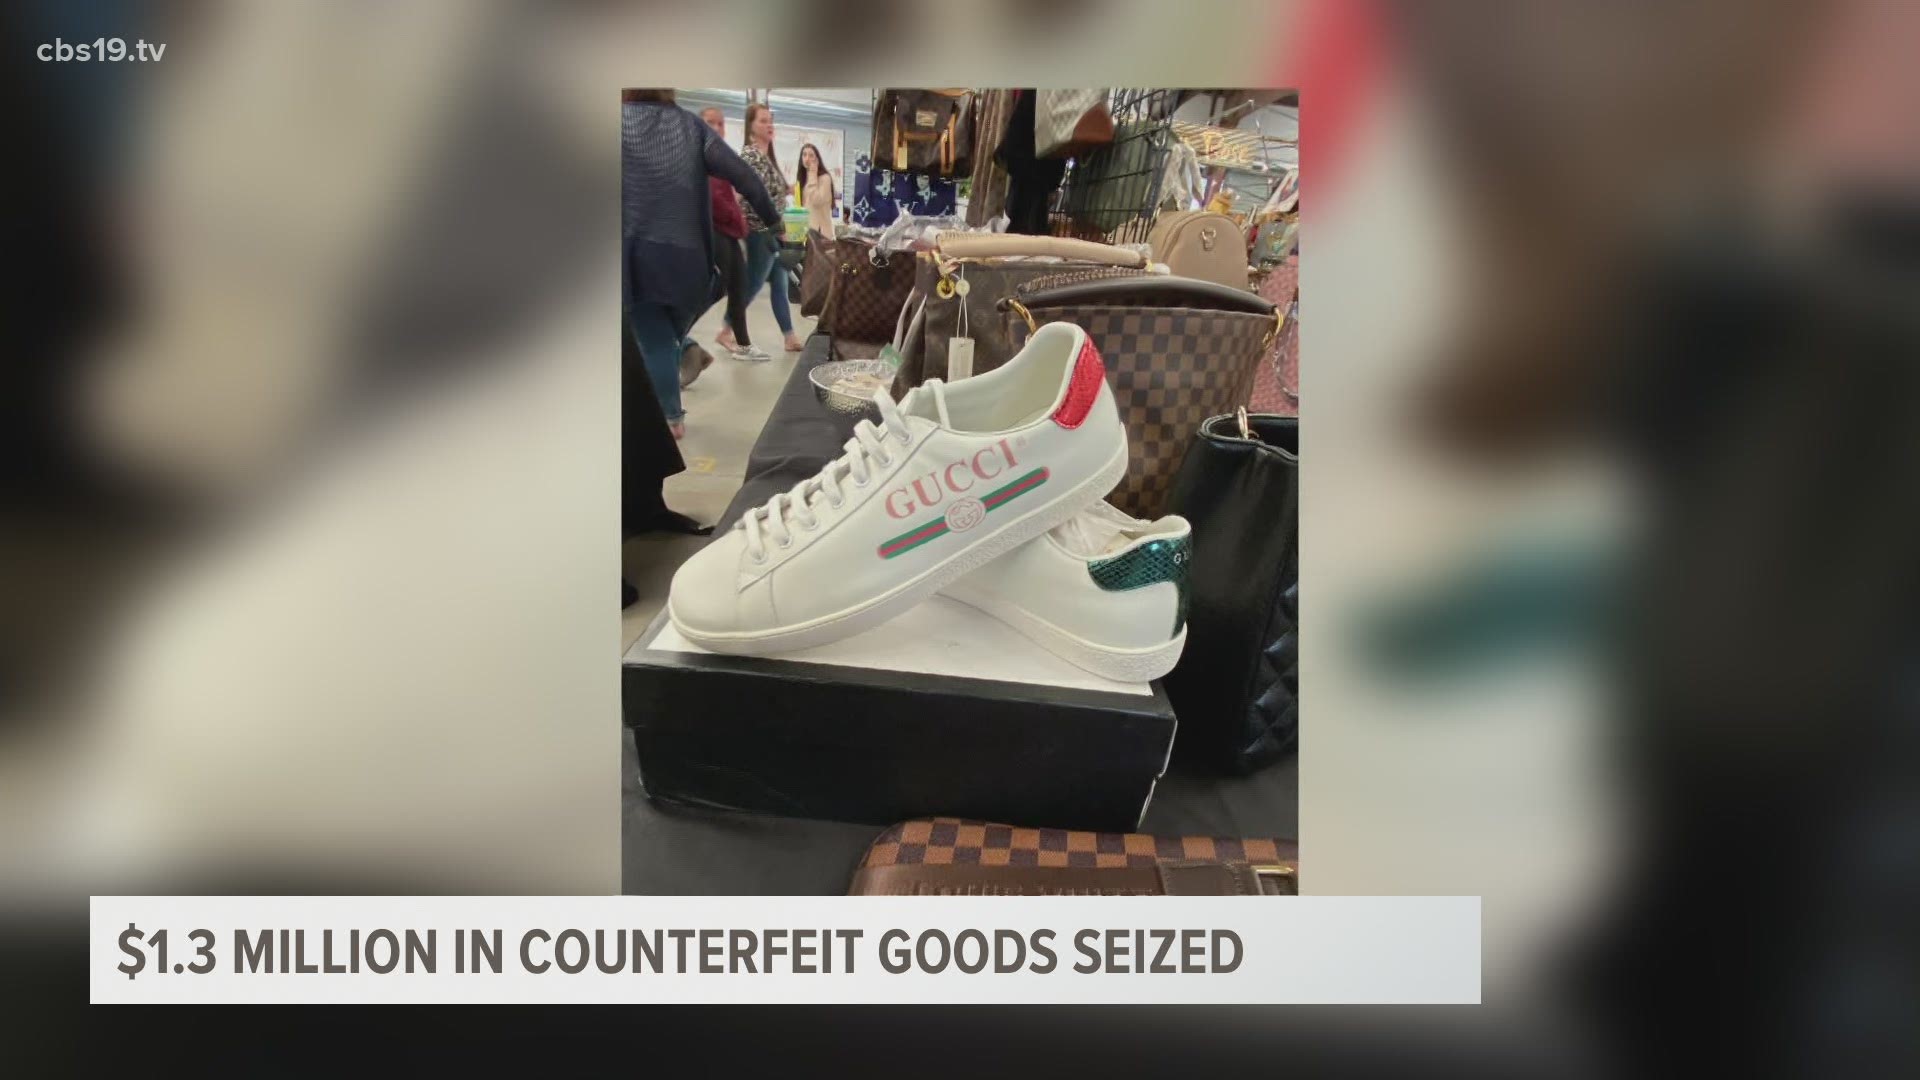 Local and federal law enforcement agencies say they seized numerous counterfeit goods at the First Monday Trade Days in Canton on Friday.